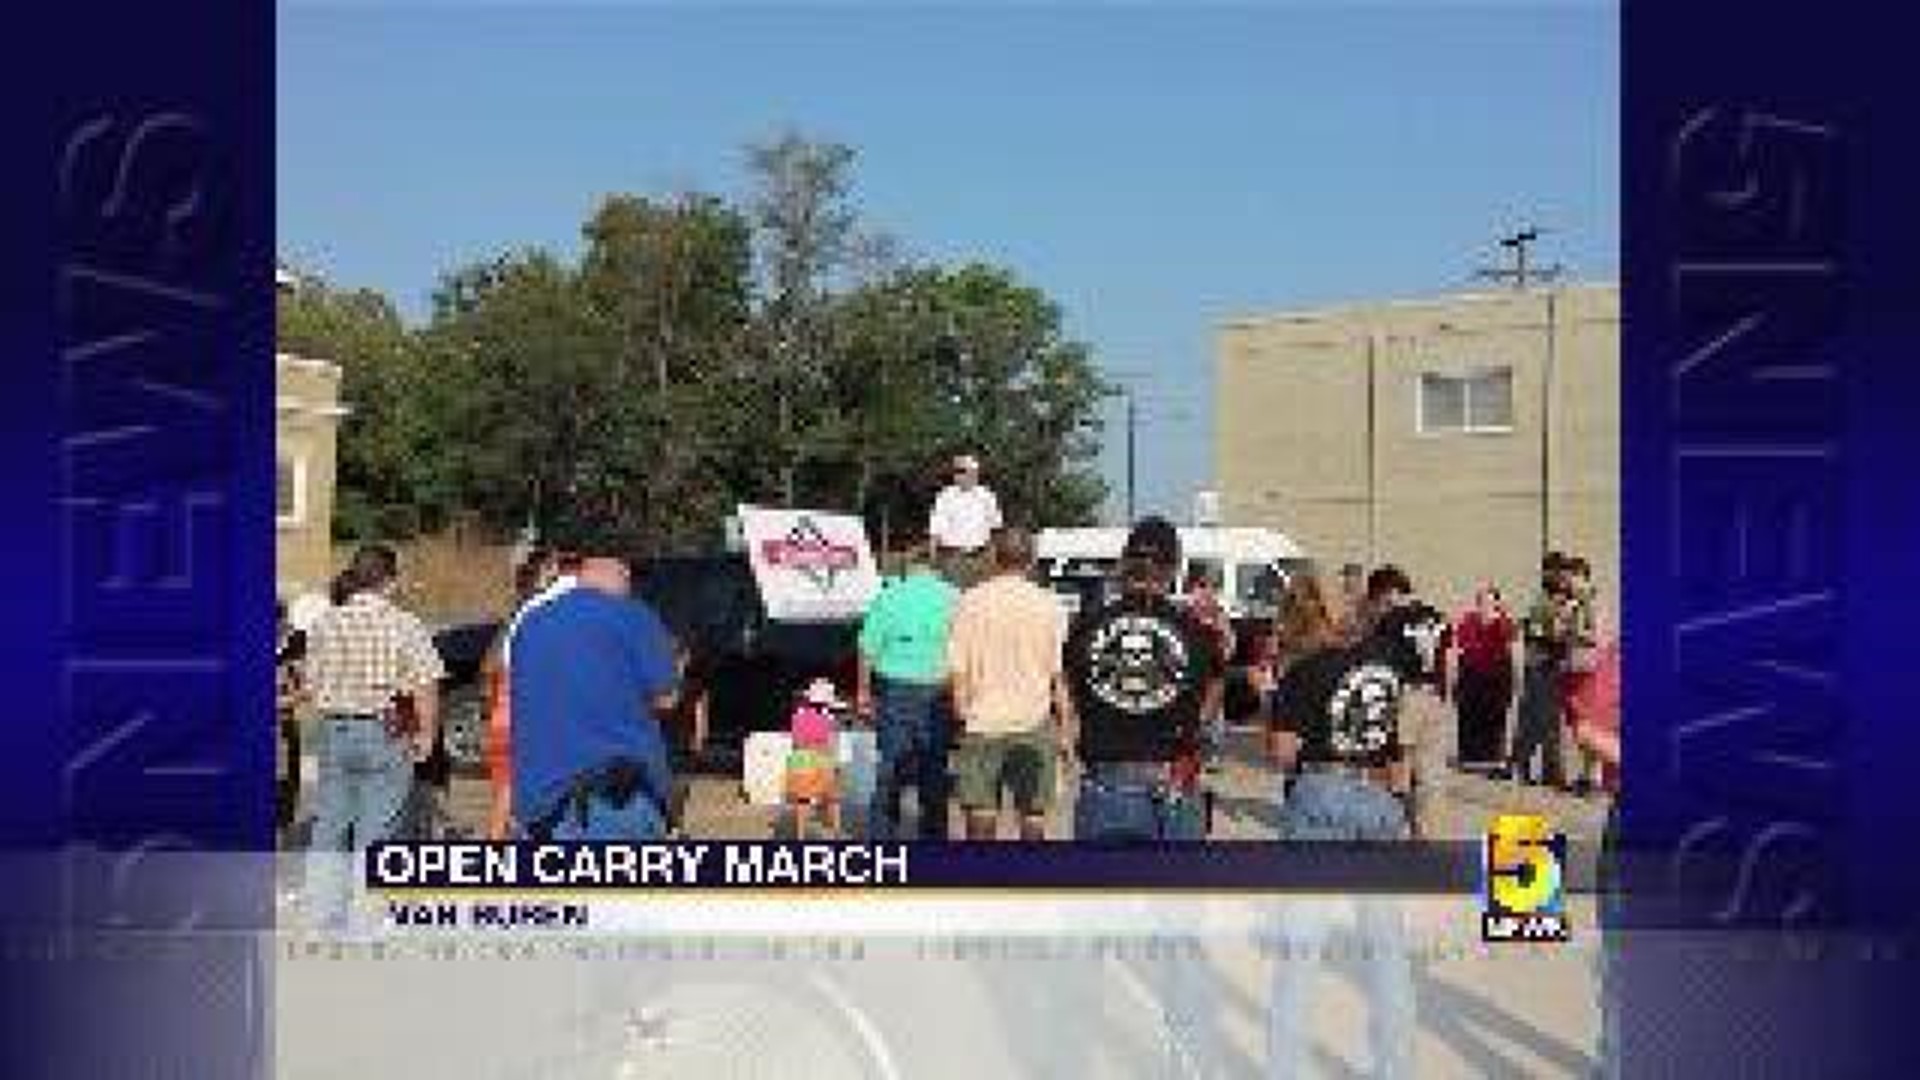 Open Carry March